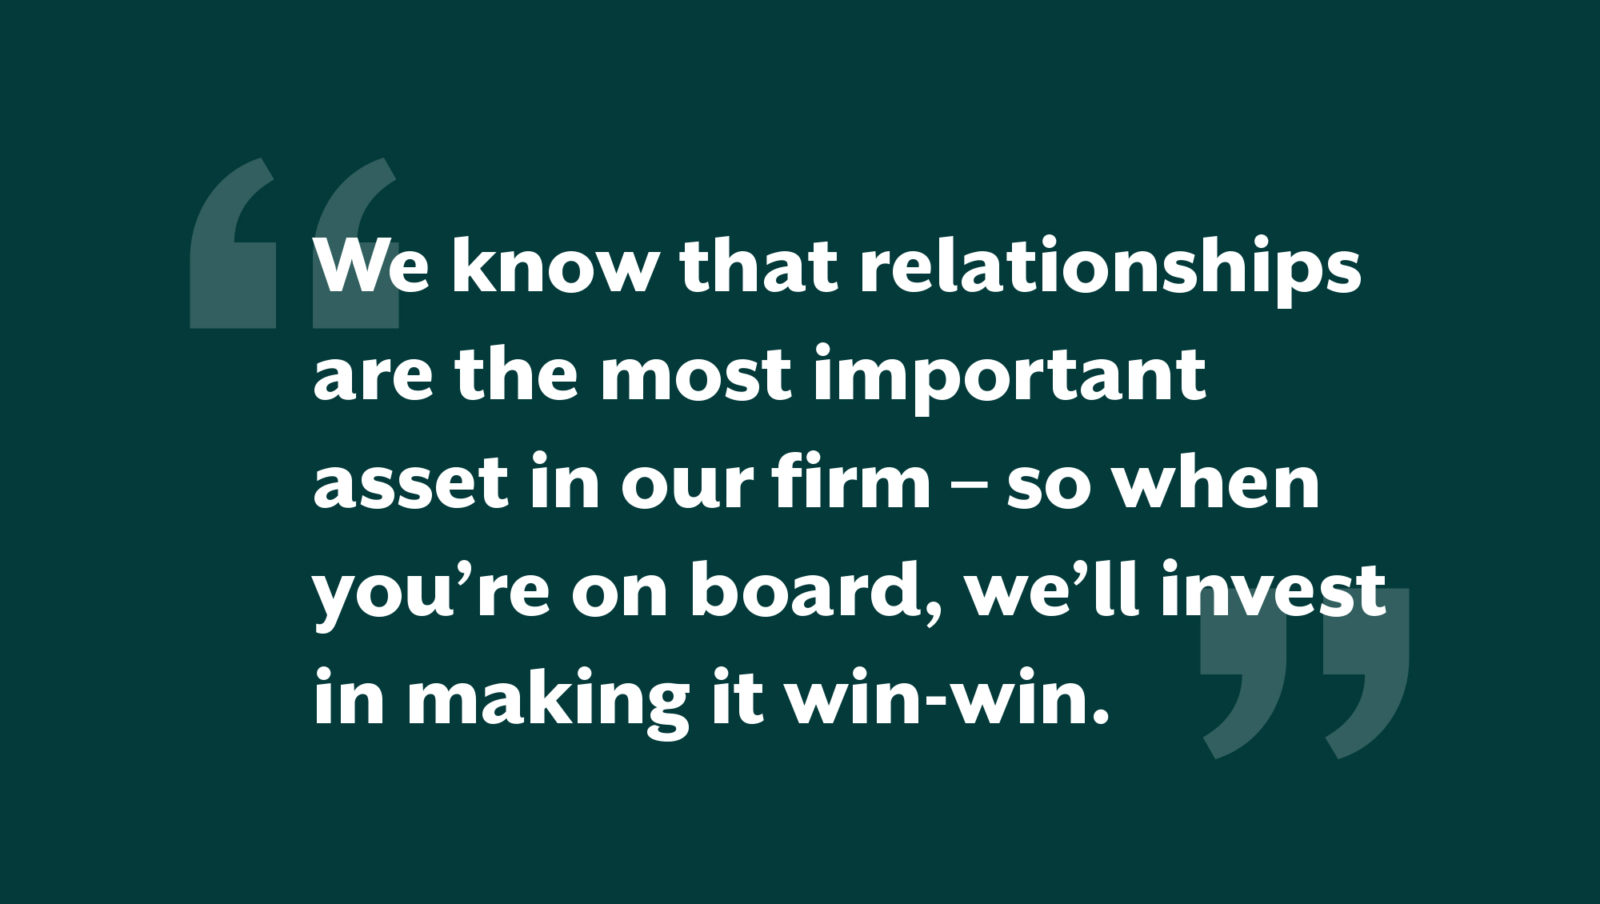 Image says: We know that relationships are the most important asset in our firm - so when you're on board, we'll invest in making it win-win